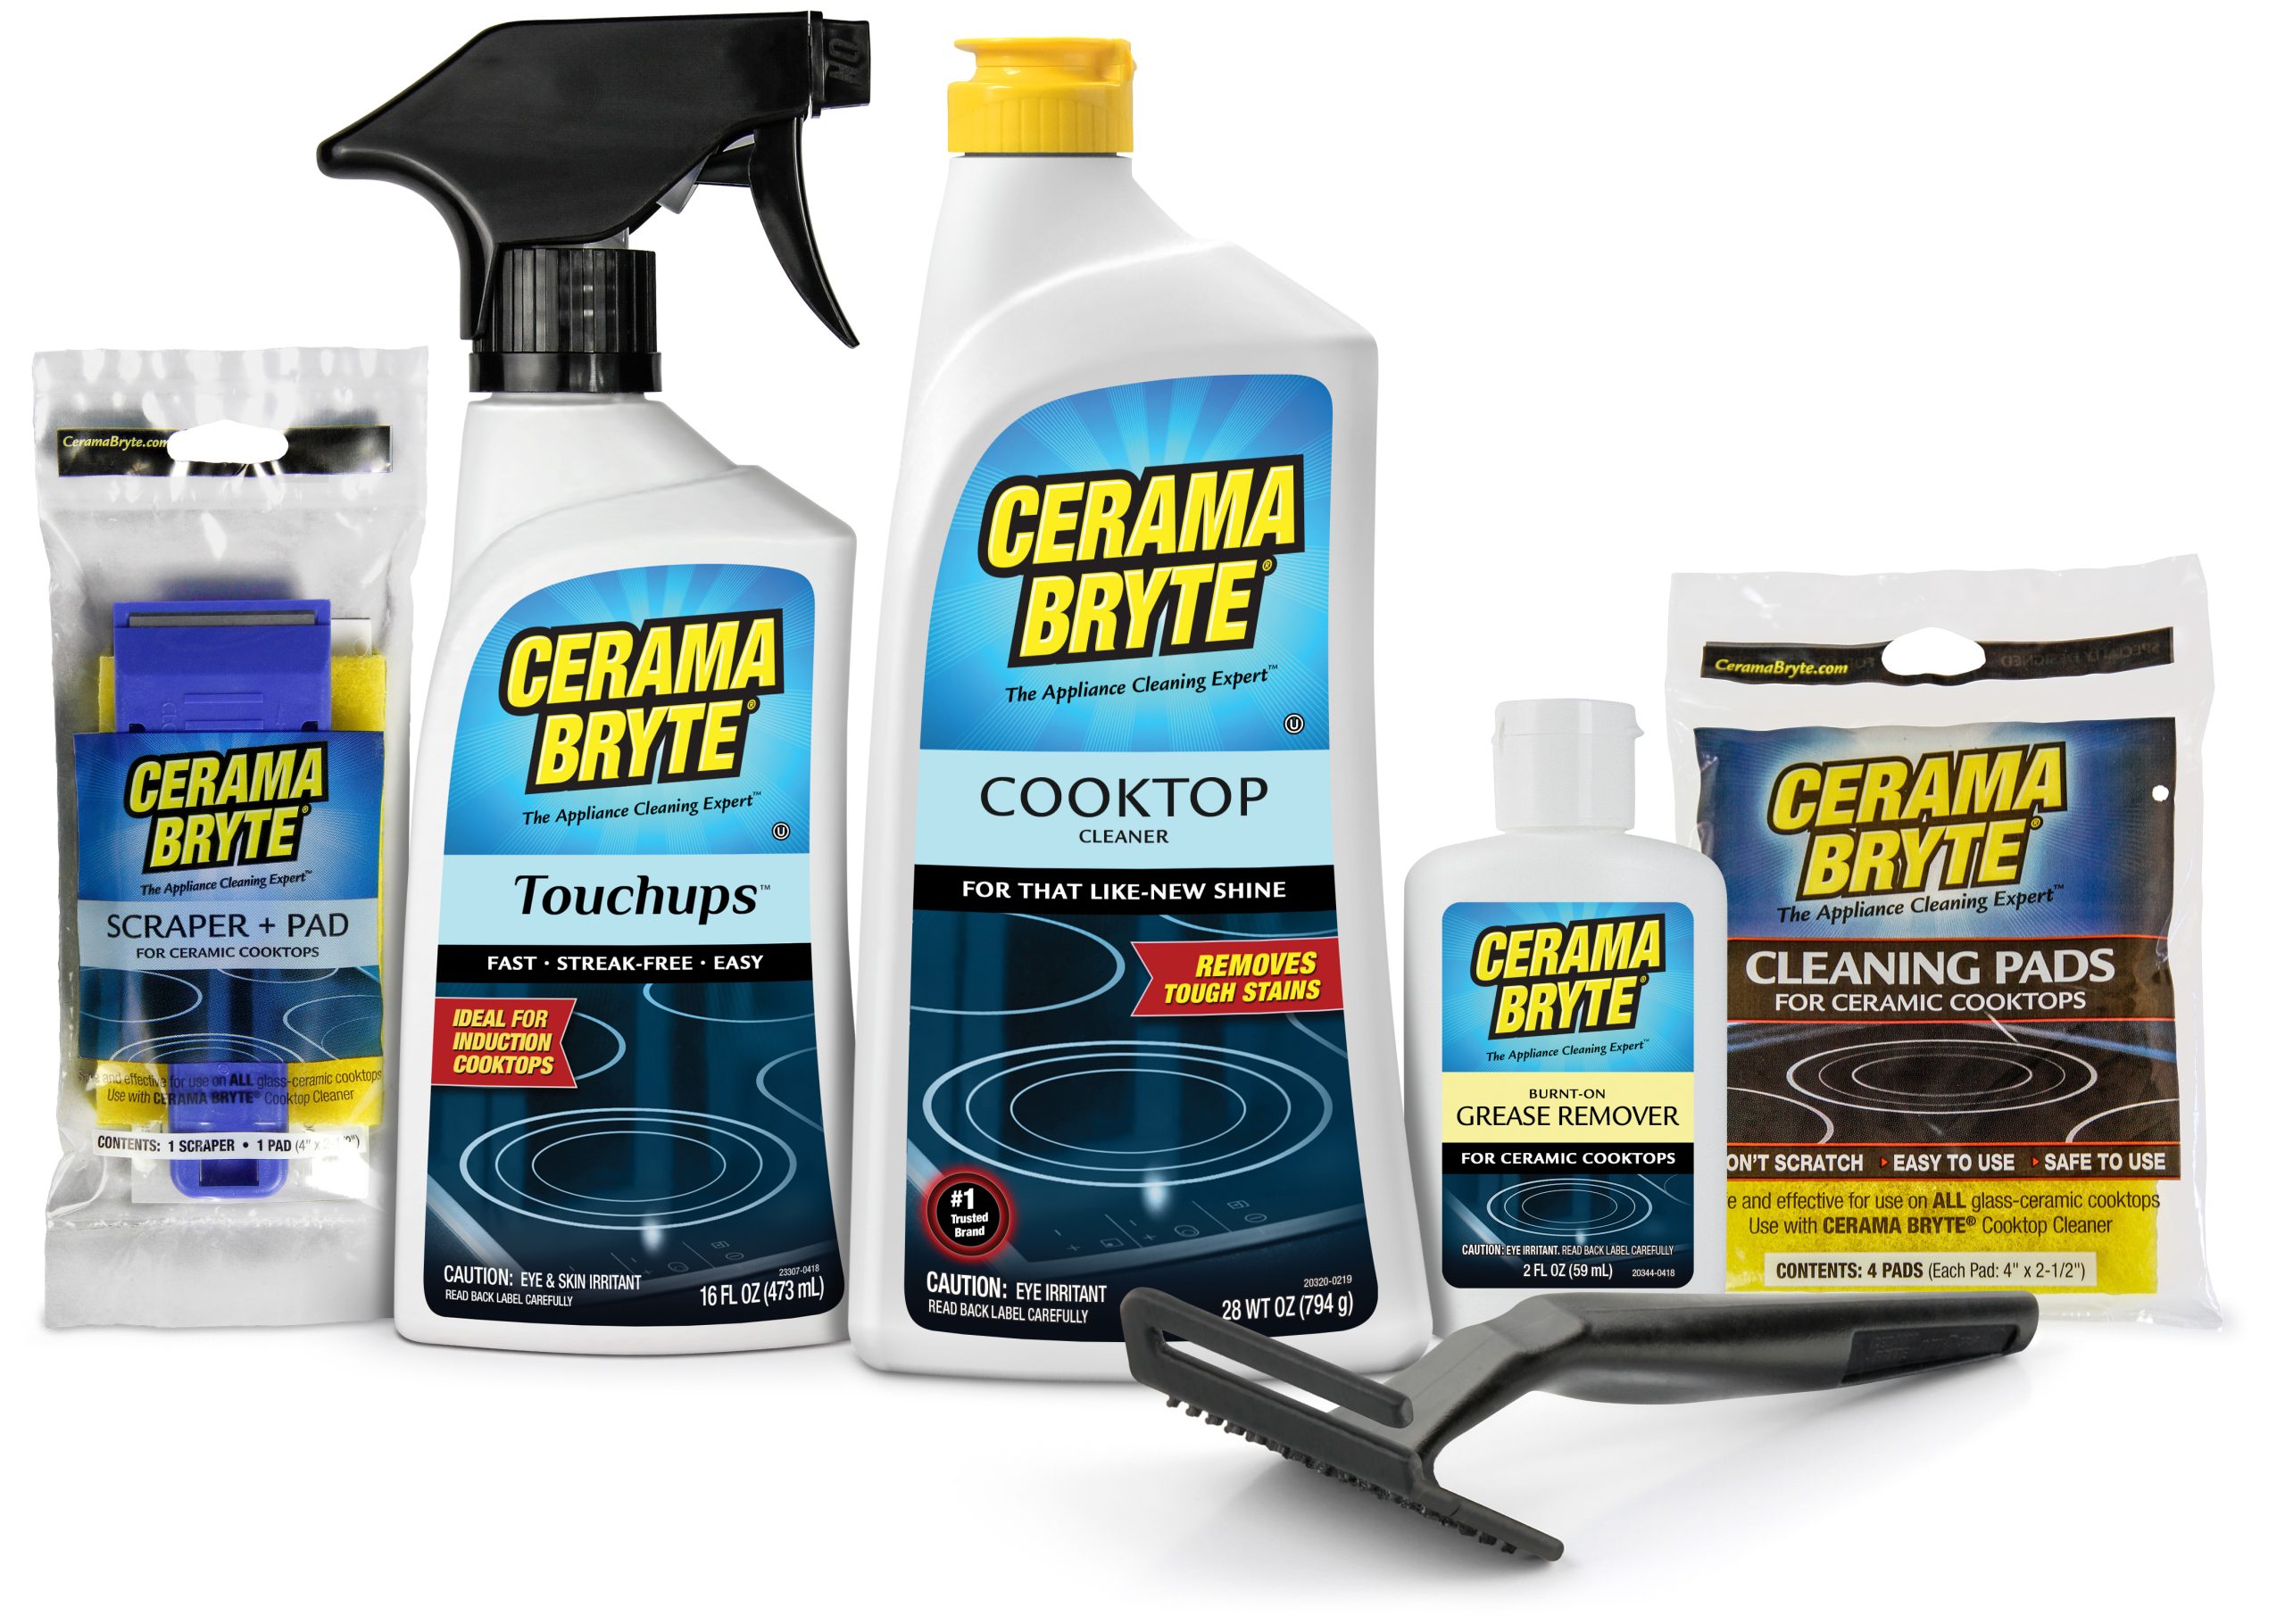 Cerama Bryte 27068 Cooktop Cleaning Kit 